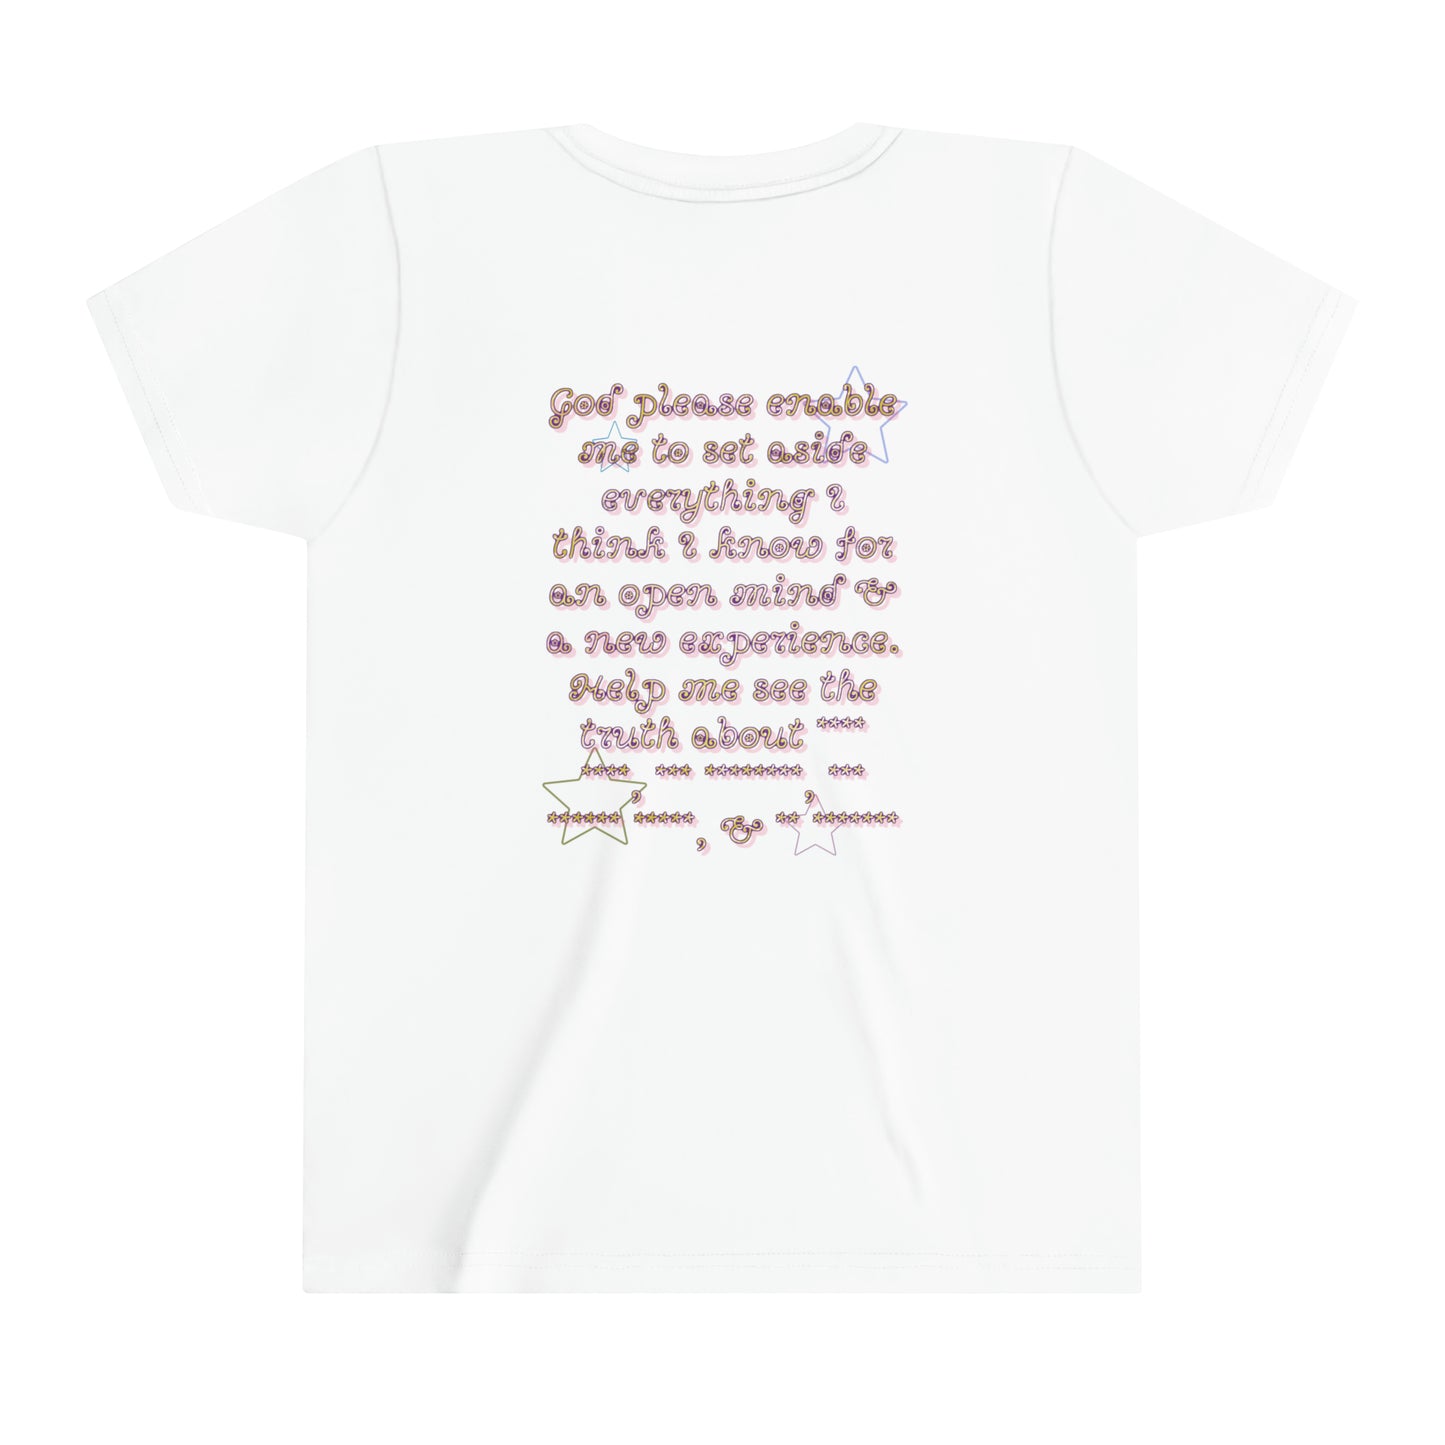 Set Aside Prayer Tee in Youth Sizes